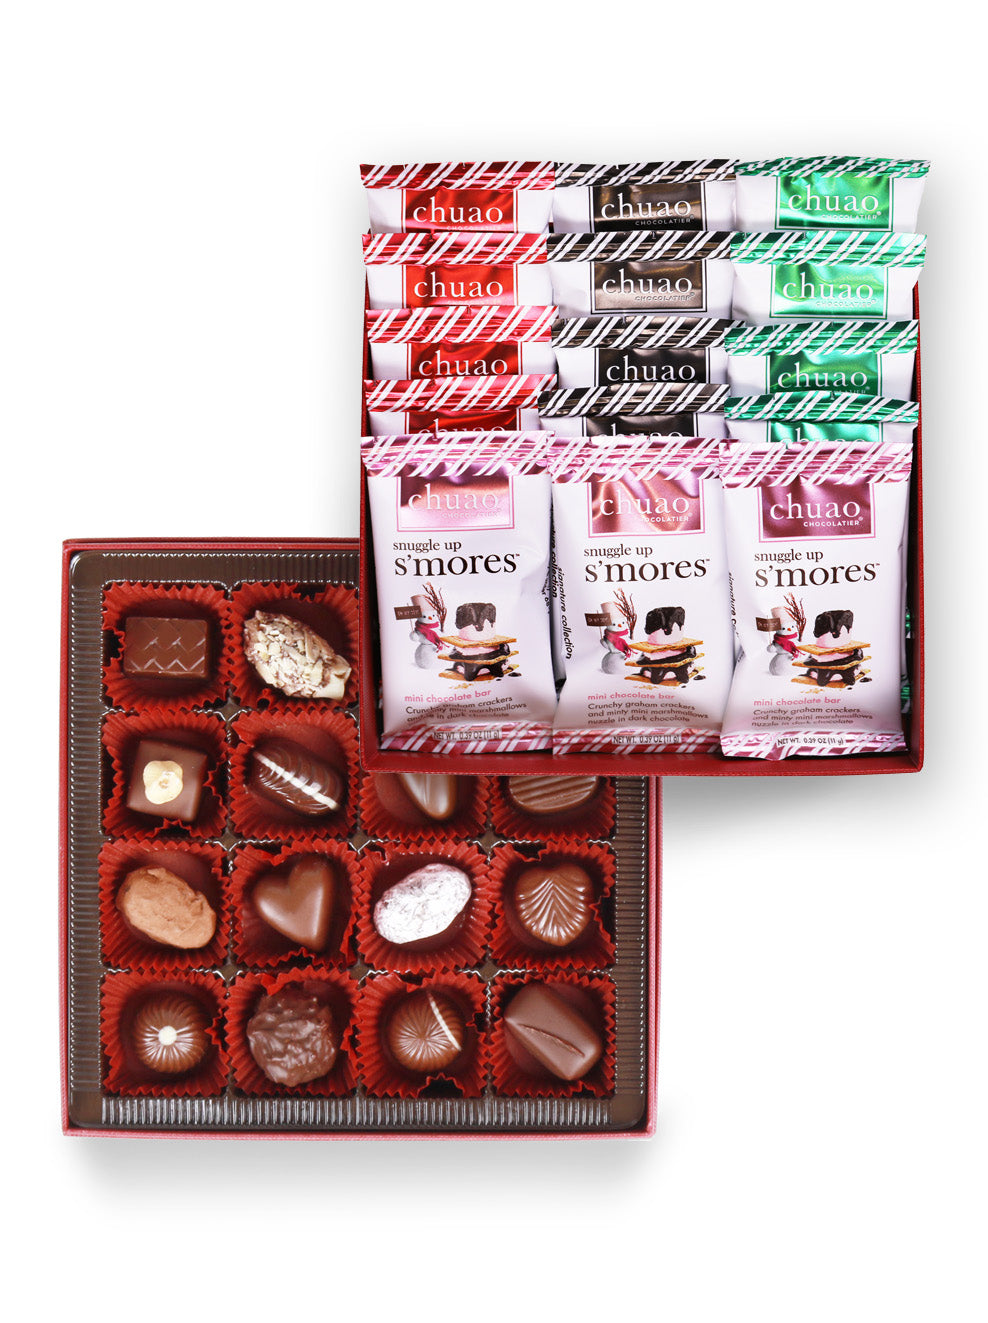 Two open boxes of chocolate showing truffles and bonbons, and an array of holiday chocolate mini bars